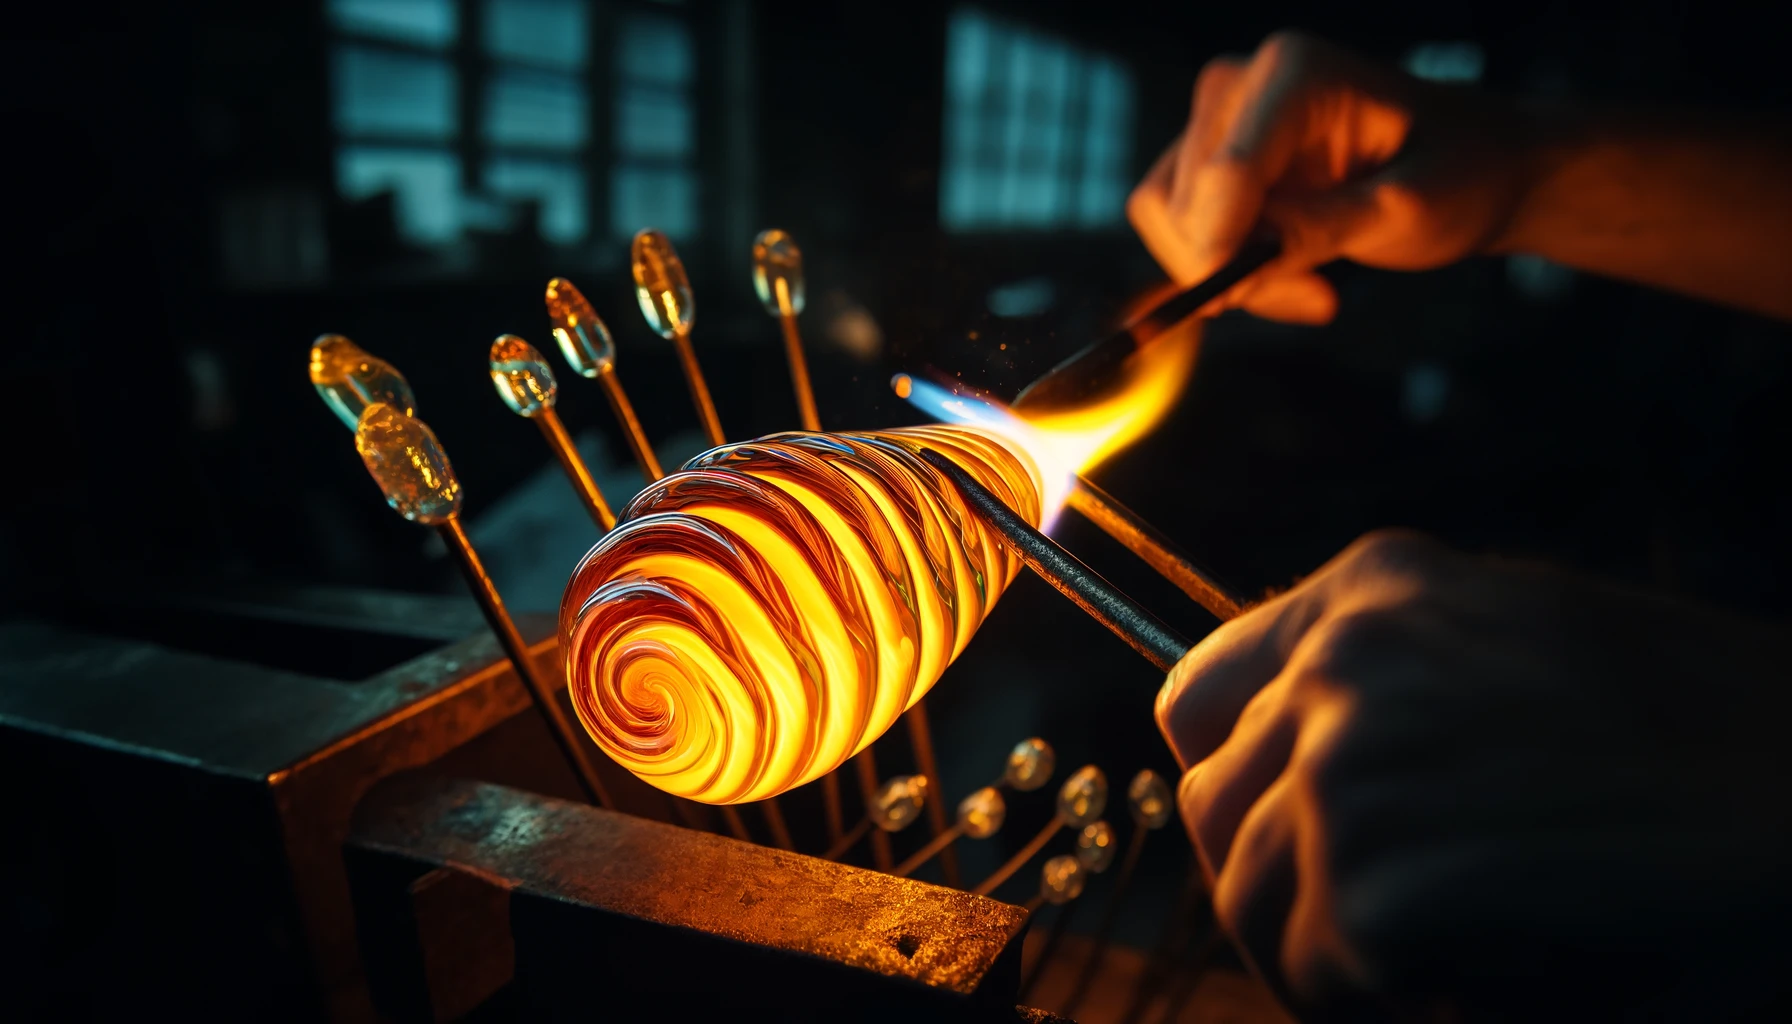 DALL·E 2024-04-18 09.54.27 - A close-up image capturing the vibrant art of glassblowing. In the foreground, a glassblower's hands are using metal tongs to shape a glowing, molten